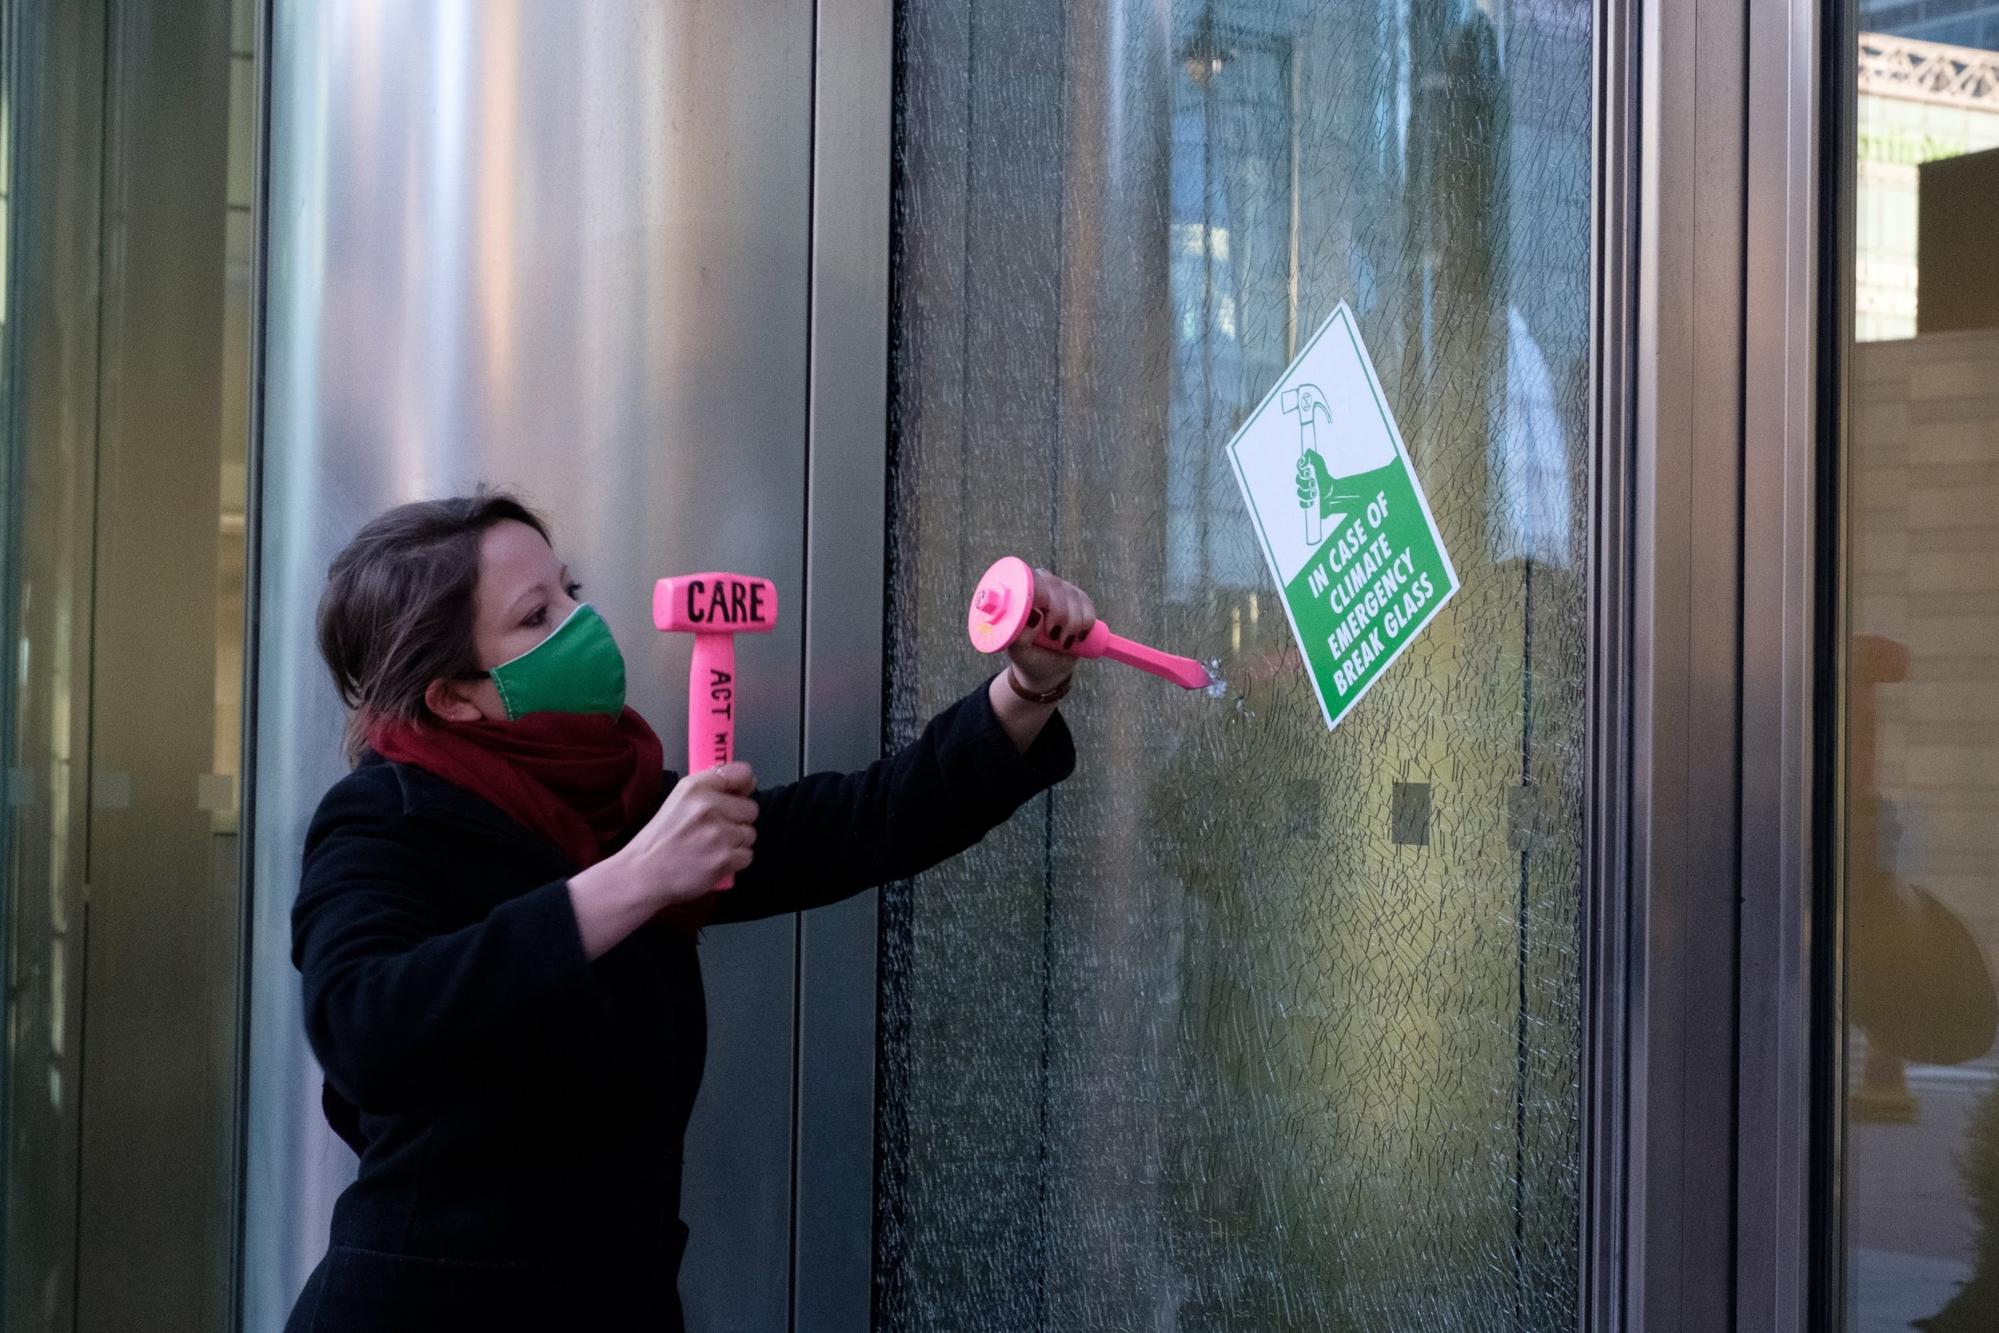 London, UK. 7 women rebels break windows of Barclays HQ, the 7th dirtiest bank, inspired by the suffragettes who broke windows in their fight to win women the vote. 